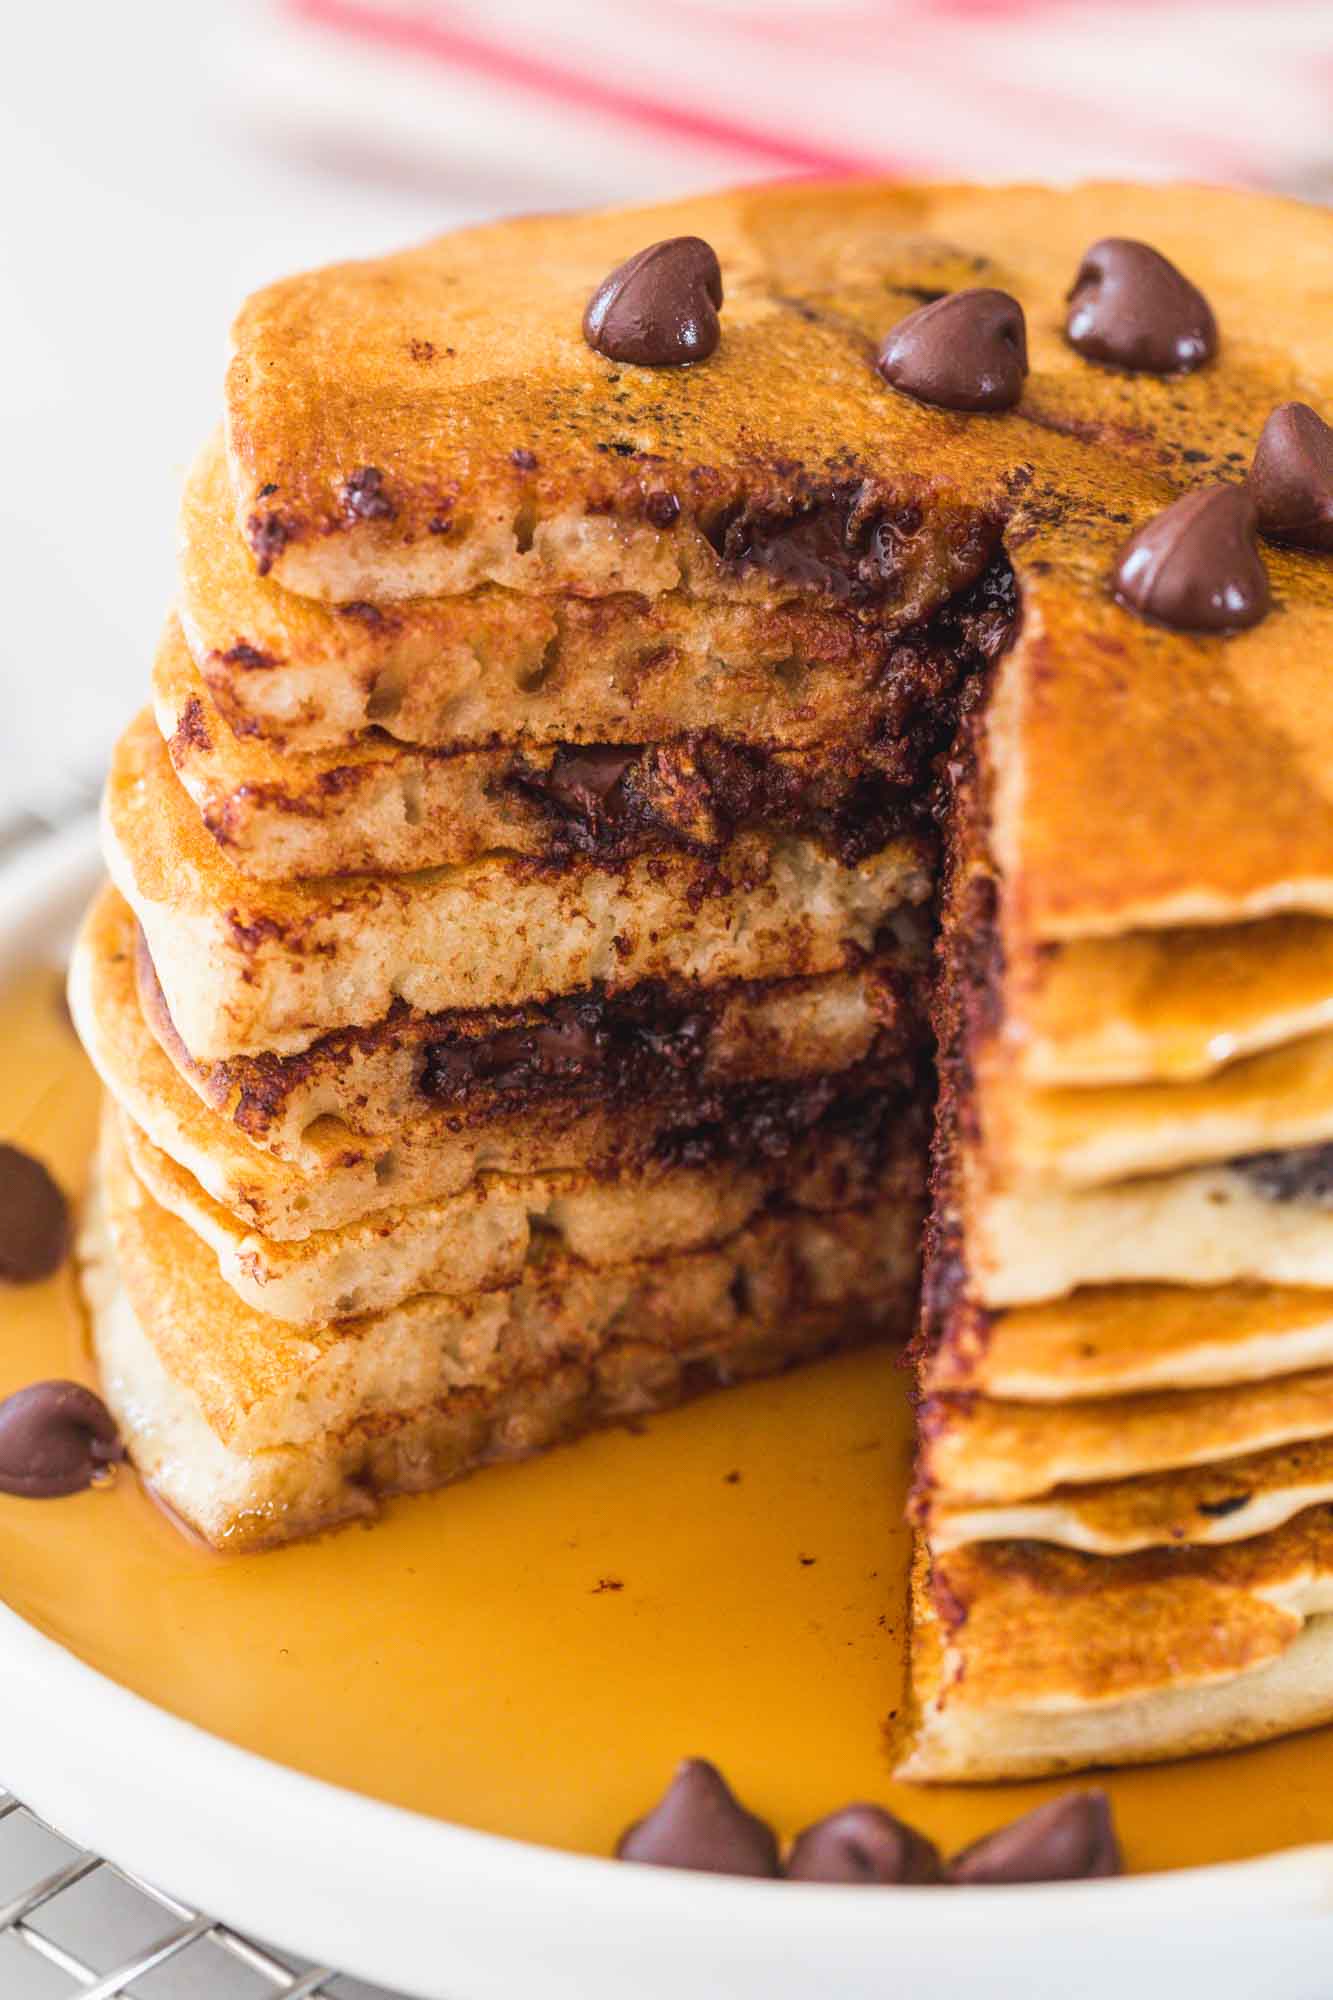 Stack of chocolate chip pancakes being cut through